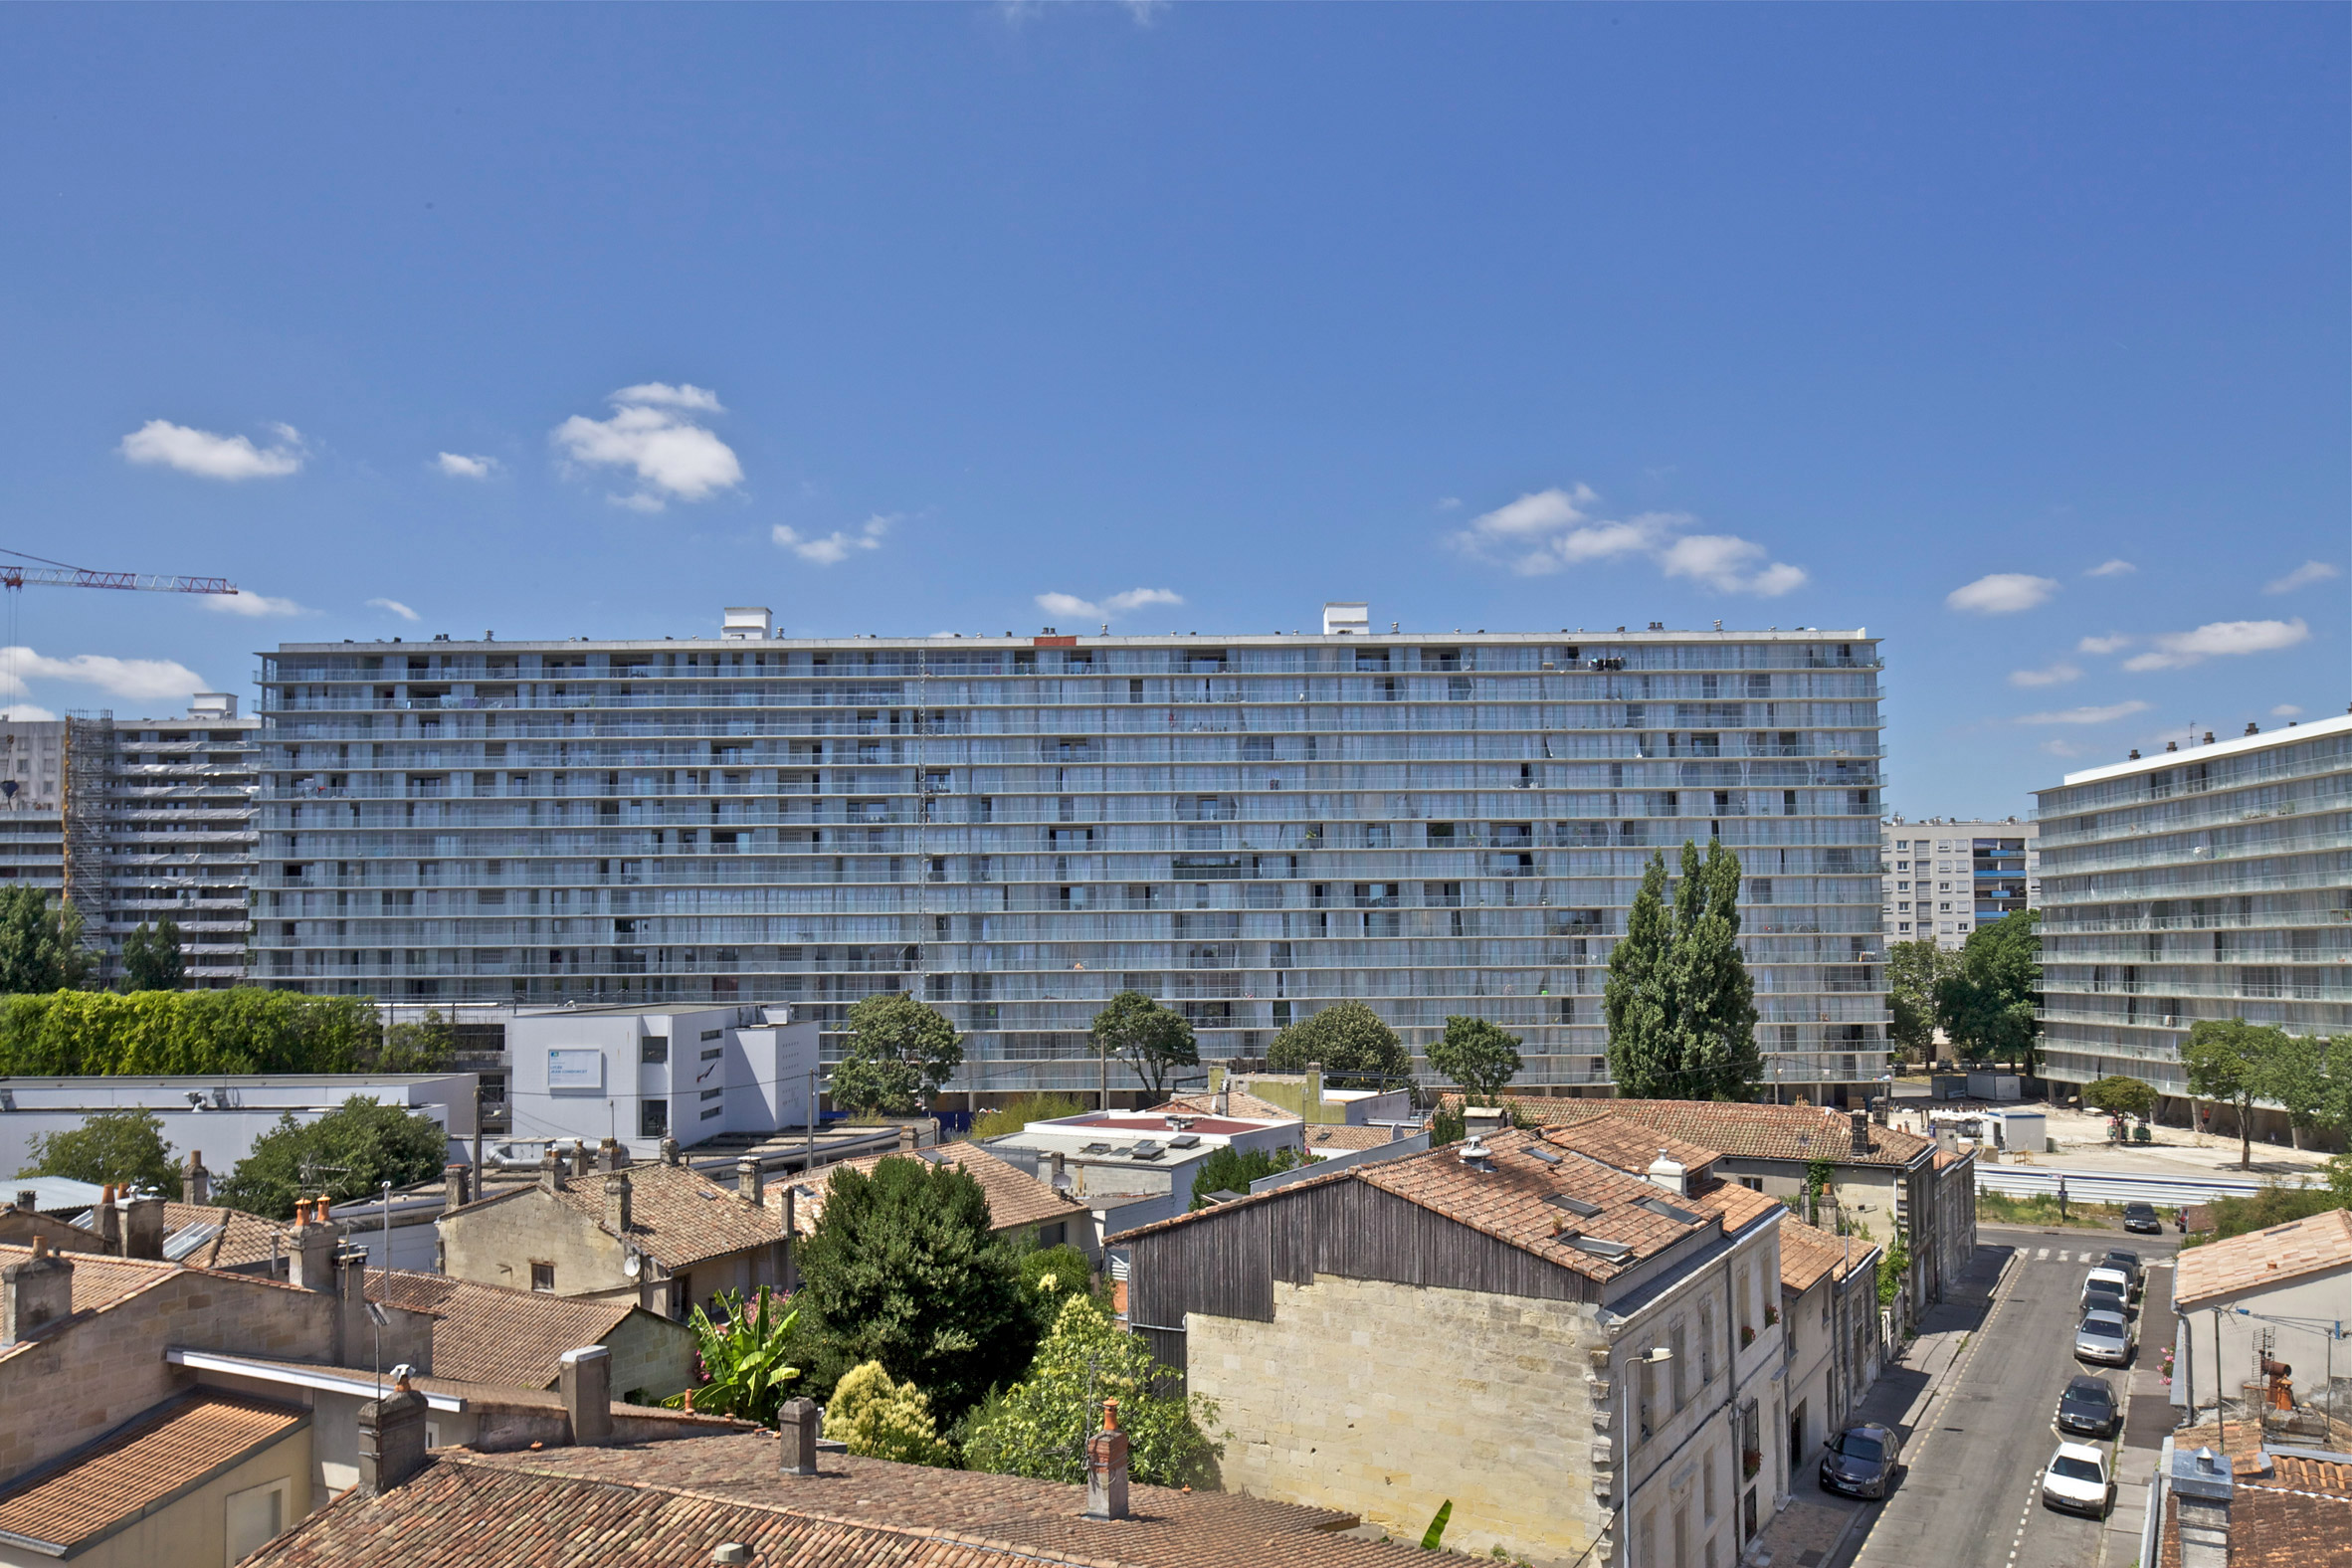 The studio won the Mies van der Rohe award for its social housing in Grand Parc Bordeaux